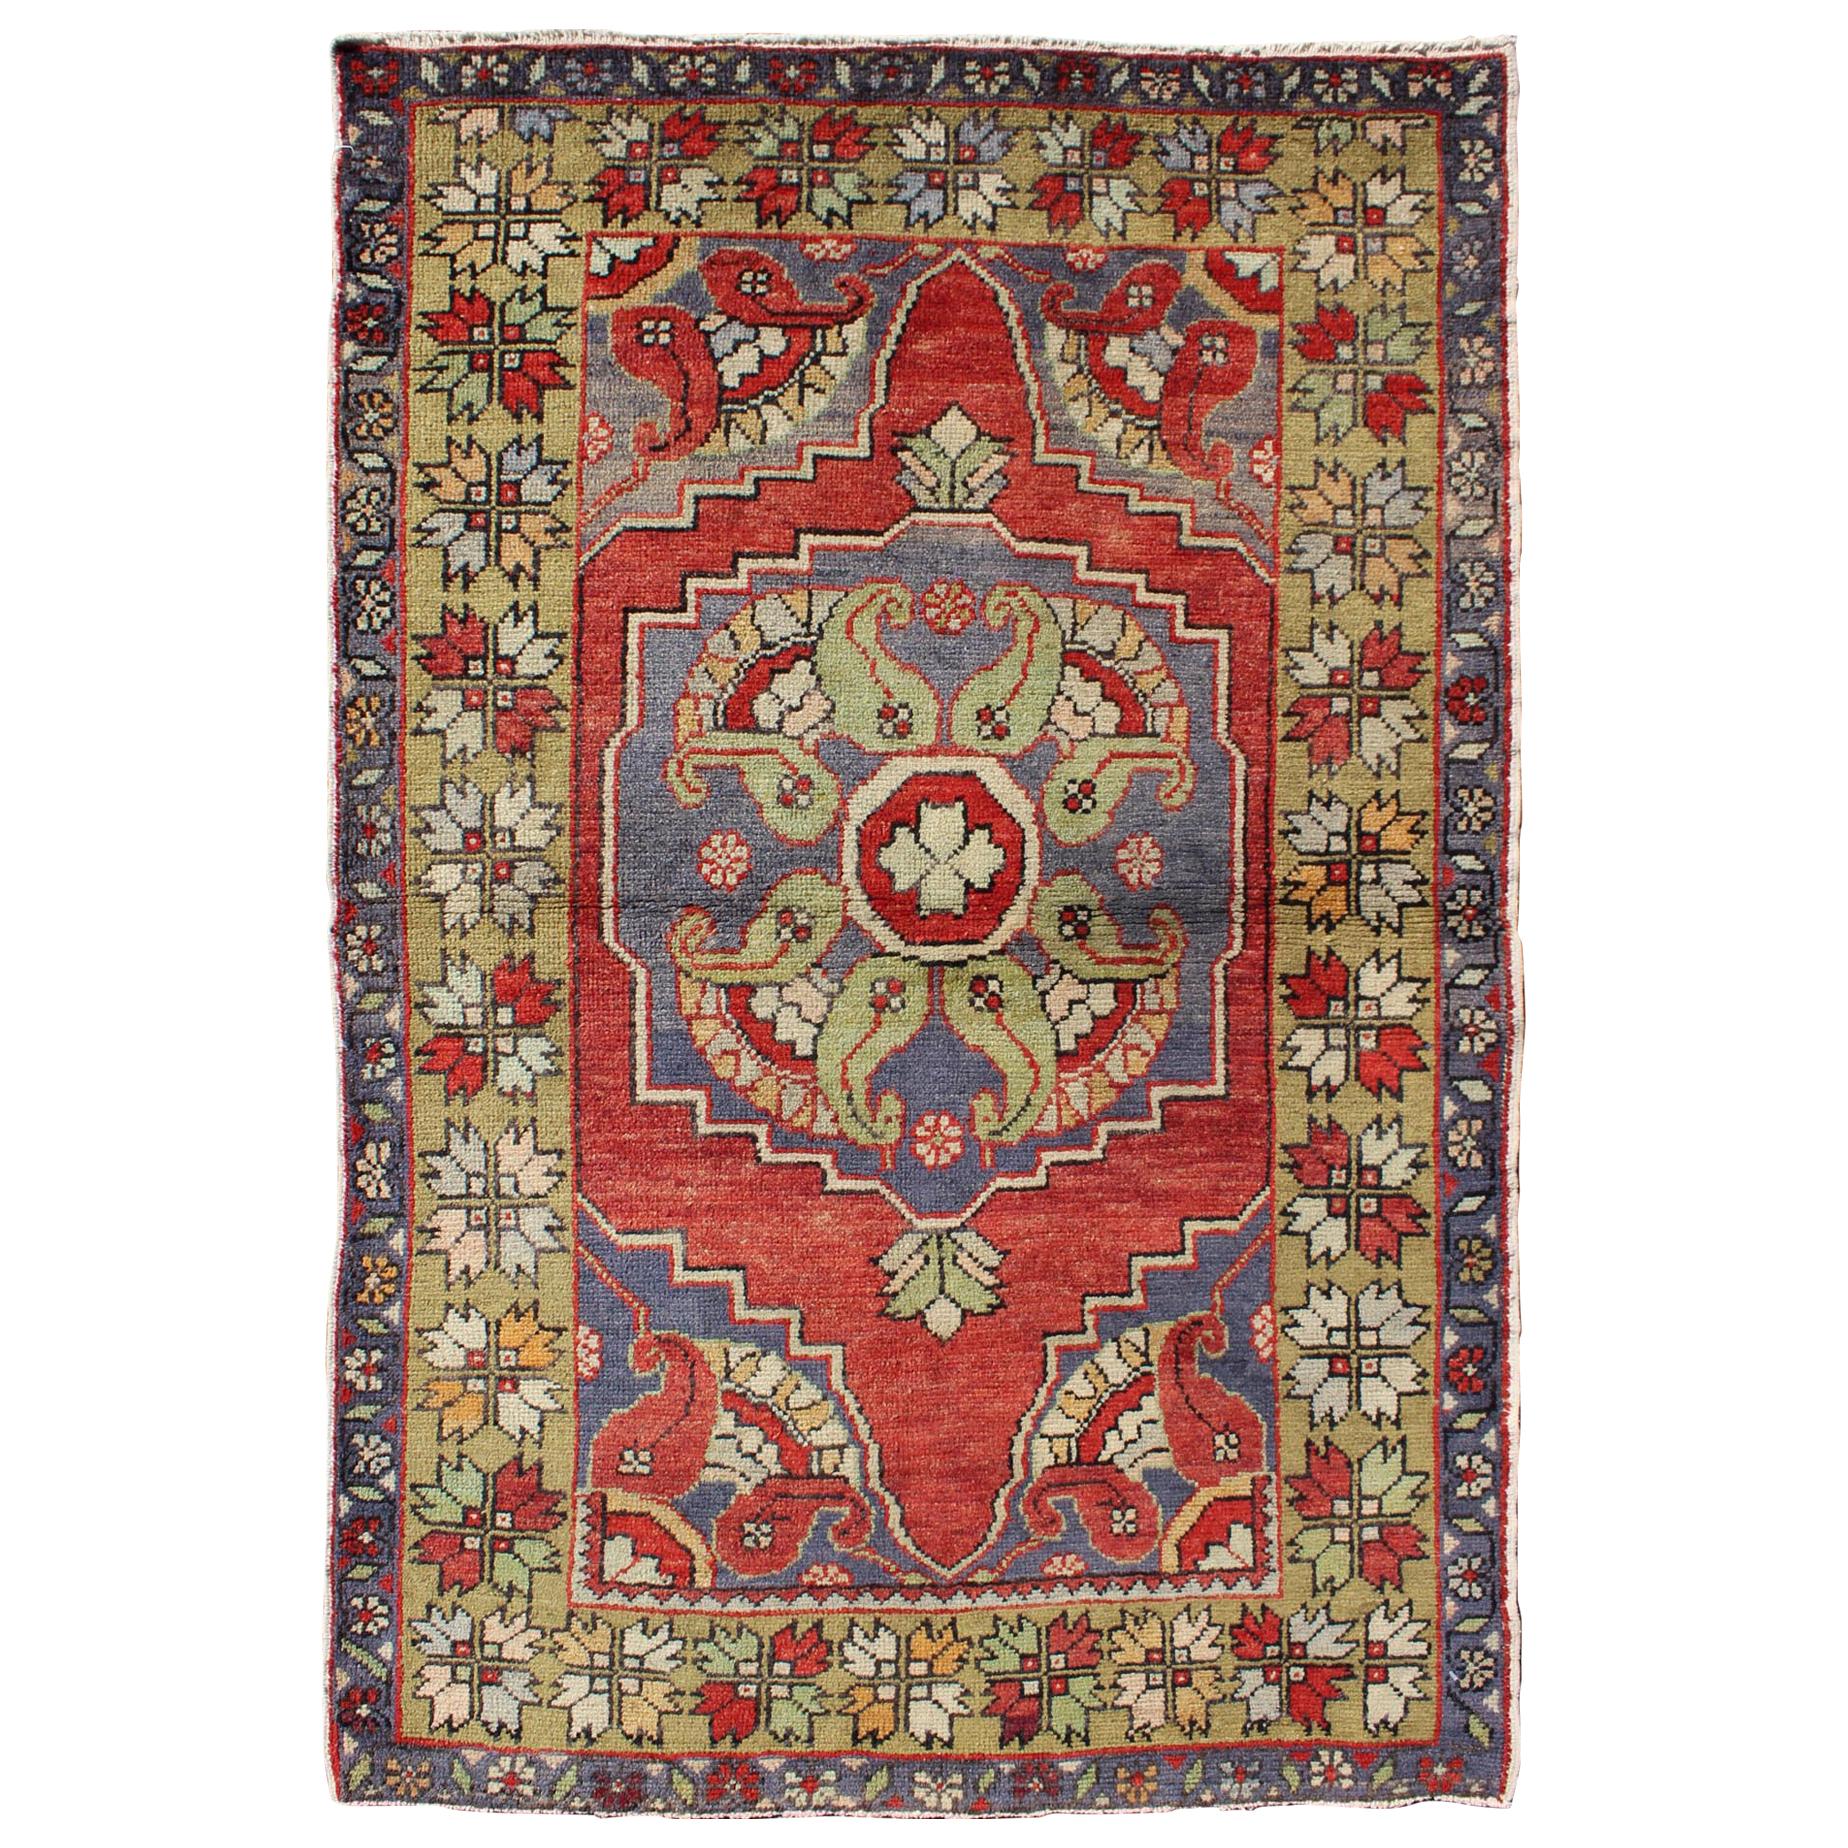 Vintage Turkish Oushak Rug with Tribal Medallion in Tomato Red and Multi-Colors